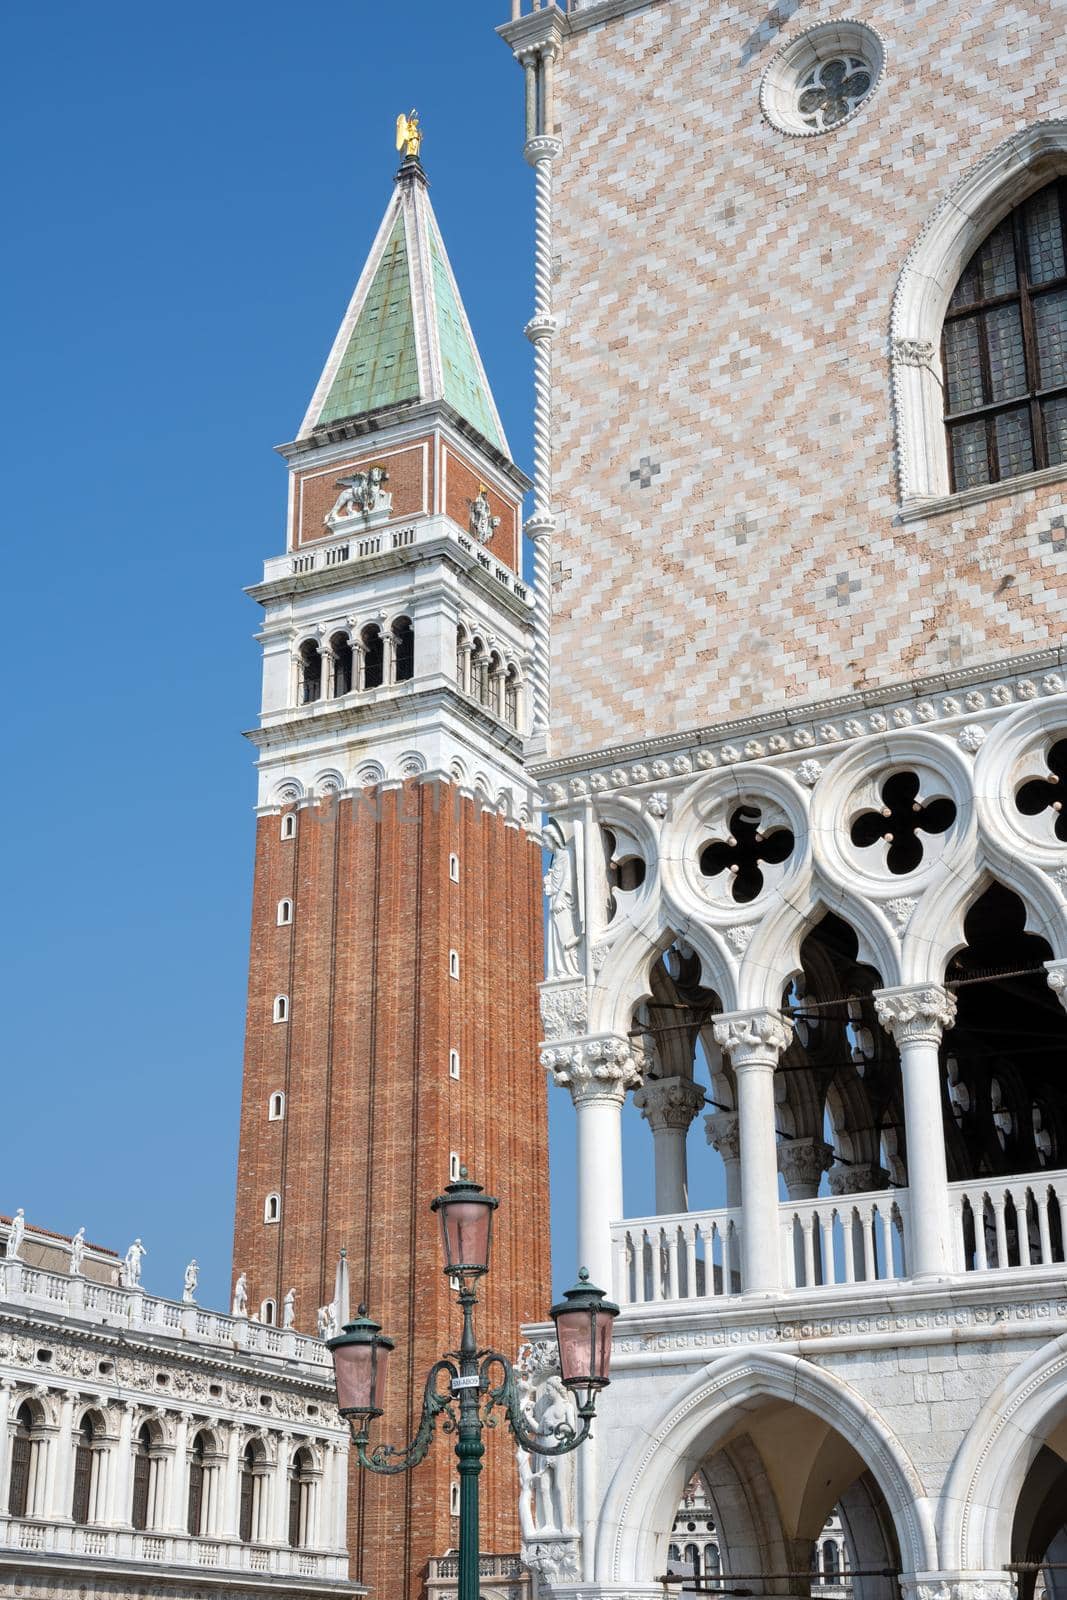 Detail of the famous Doges Palace with the Campanile in the back, seen in Venice, Italy